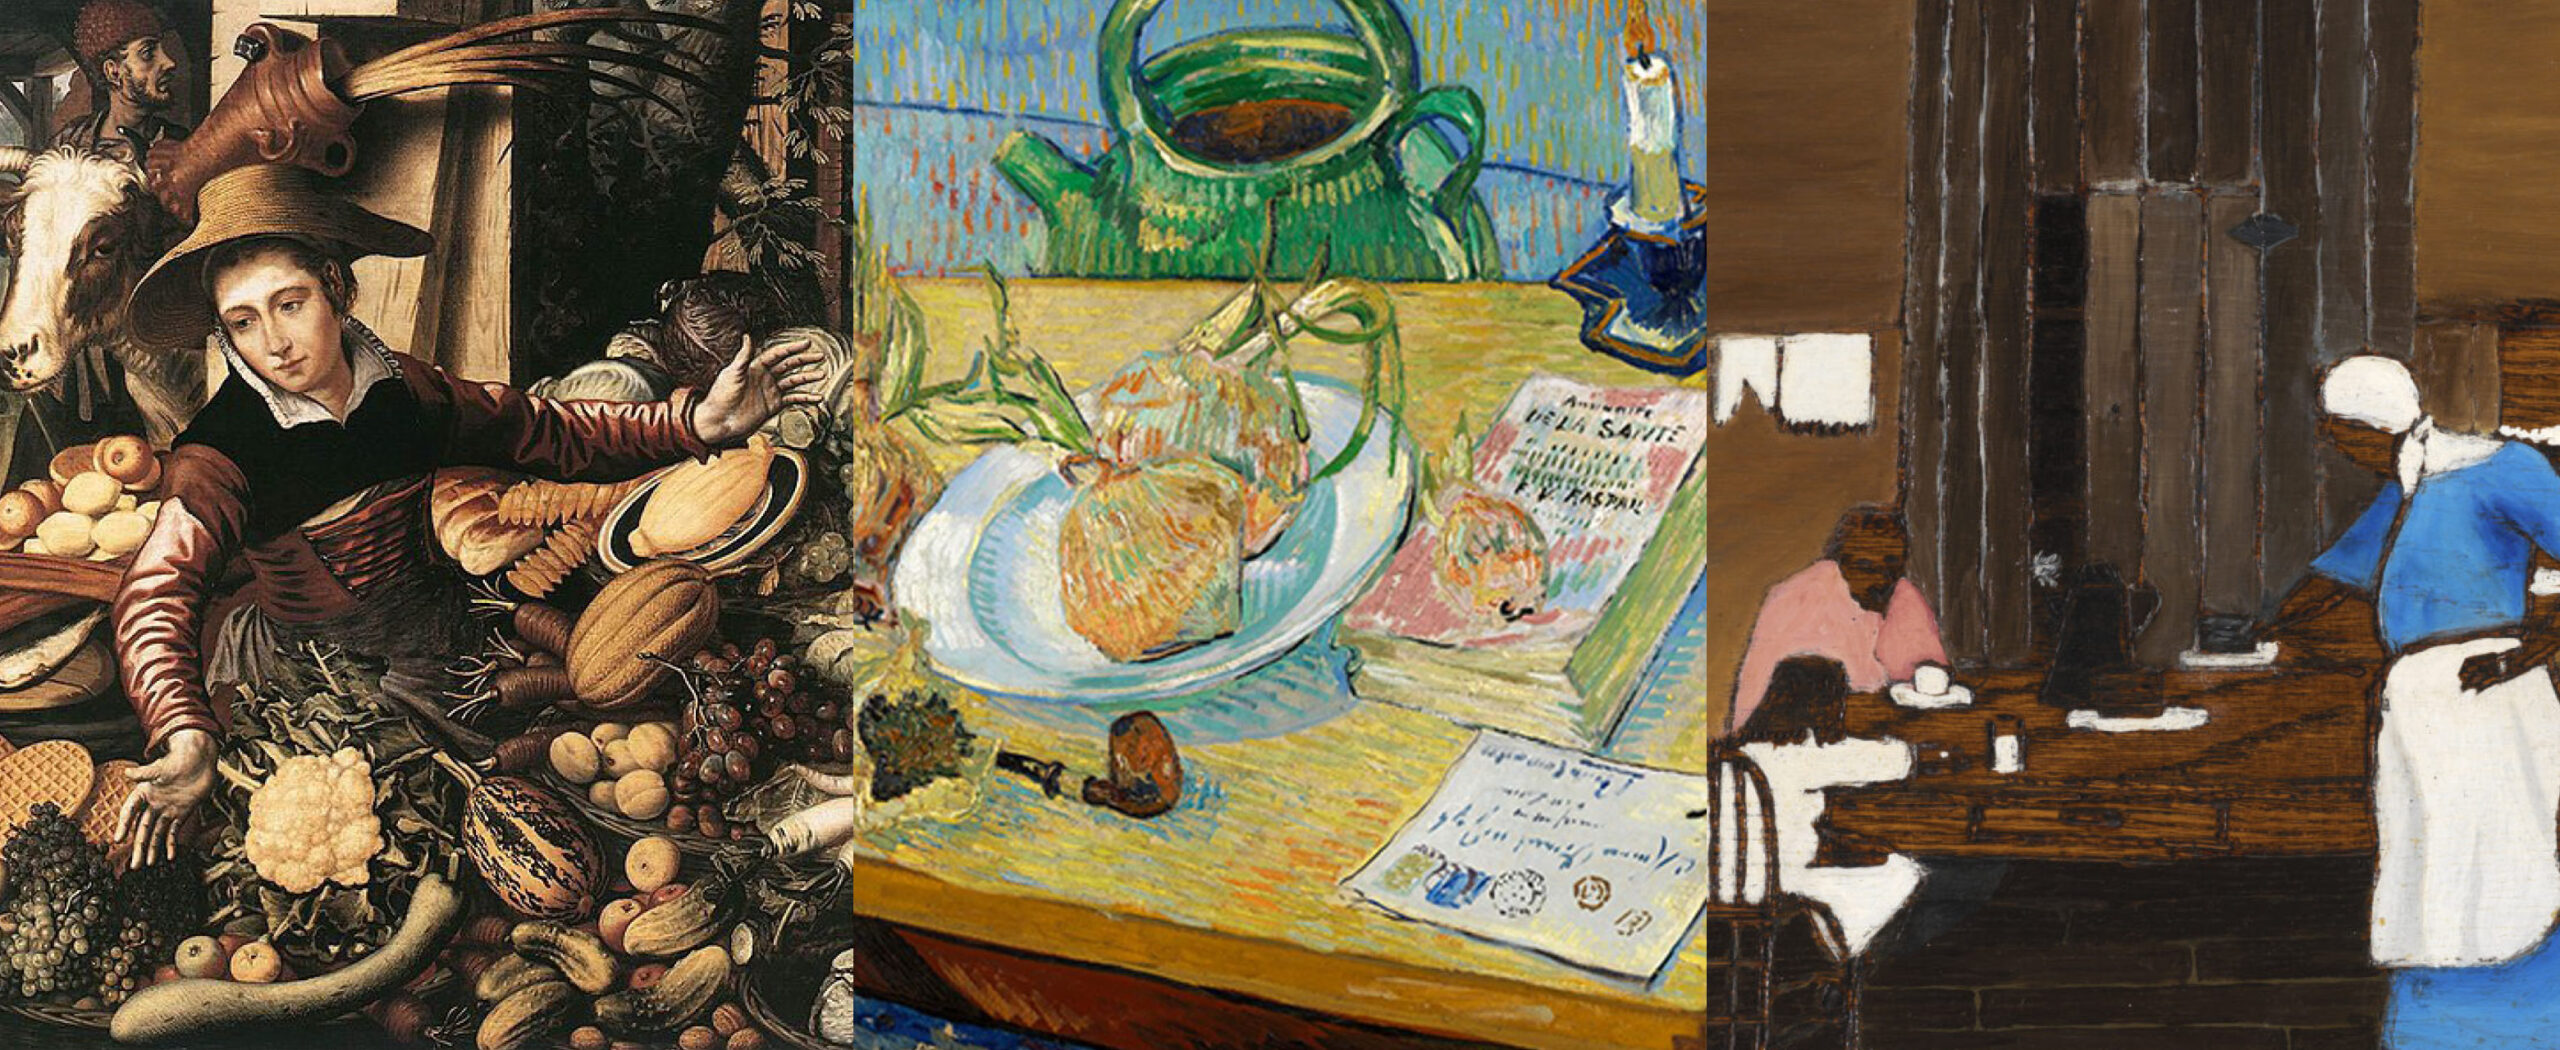 Gallery: Food & Cooking in Art History on “The Artistry of Jacques Pépin